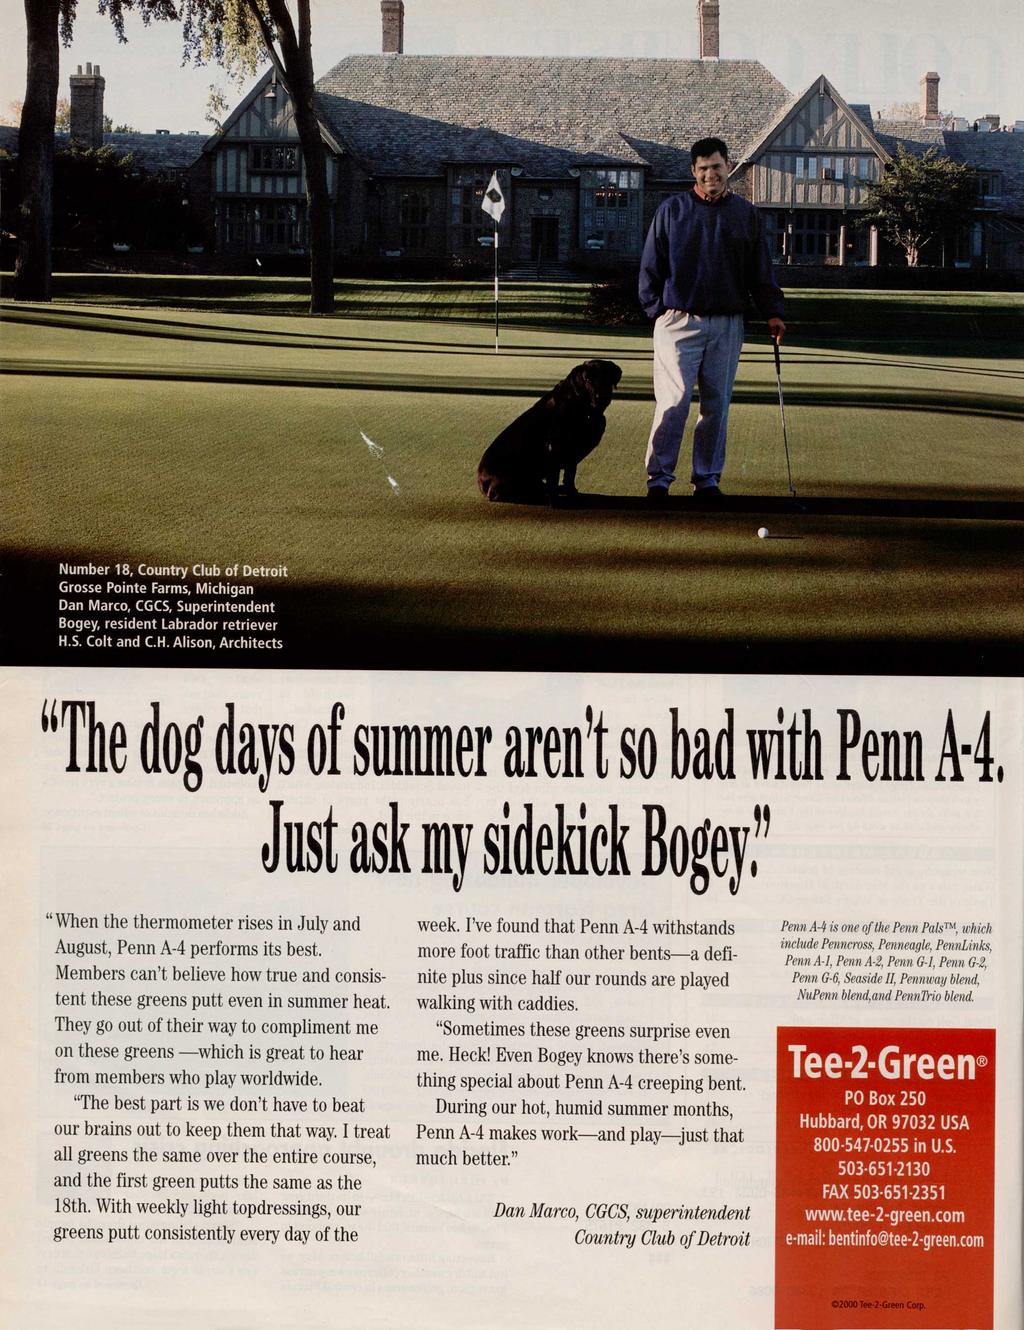 "The dog days of summer aren't so bad with Pei A-4. Just ask my sidekick Bogey," "When the thermometer rises in July and August, Penn A-4 performs its best.